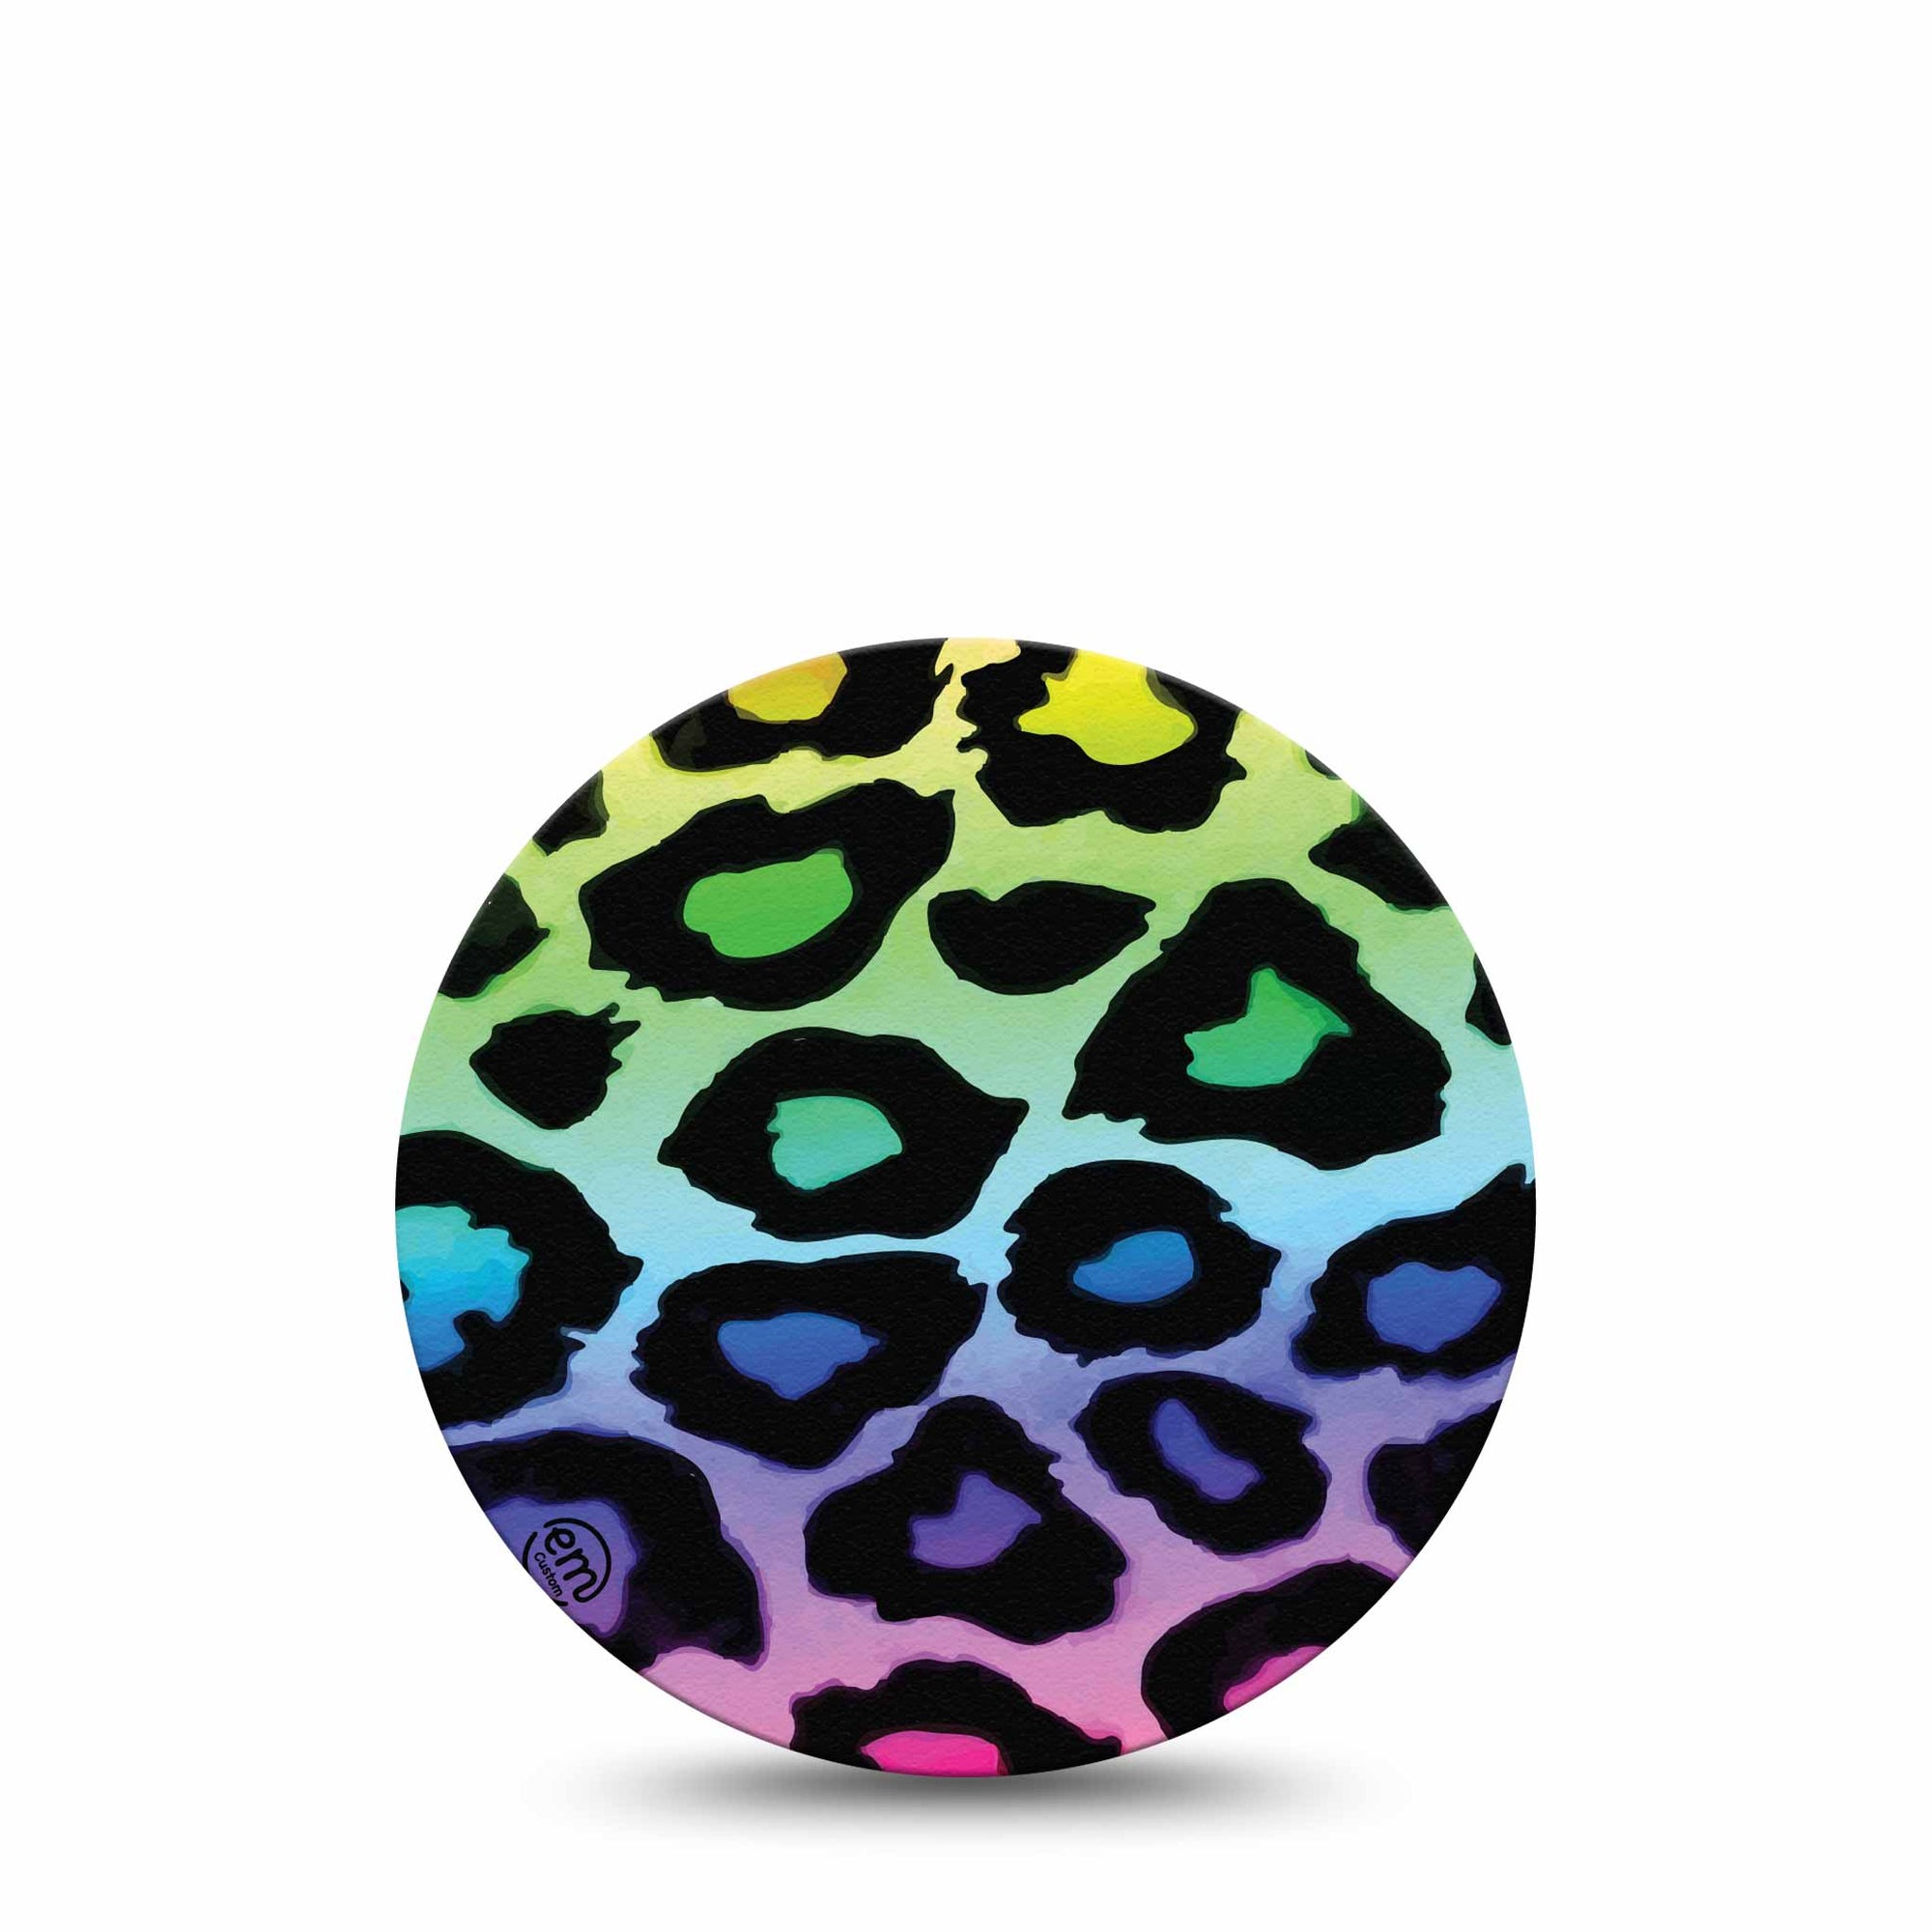 ExpressionMed Multicolored Cheetah Print Libre Overpatch